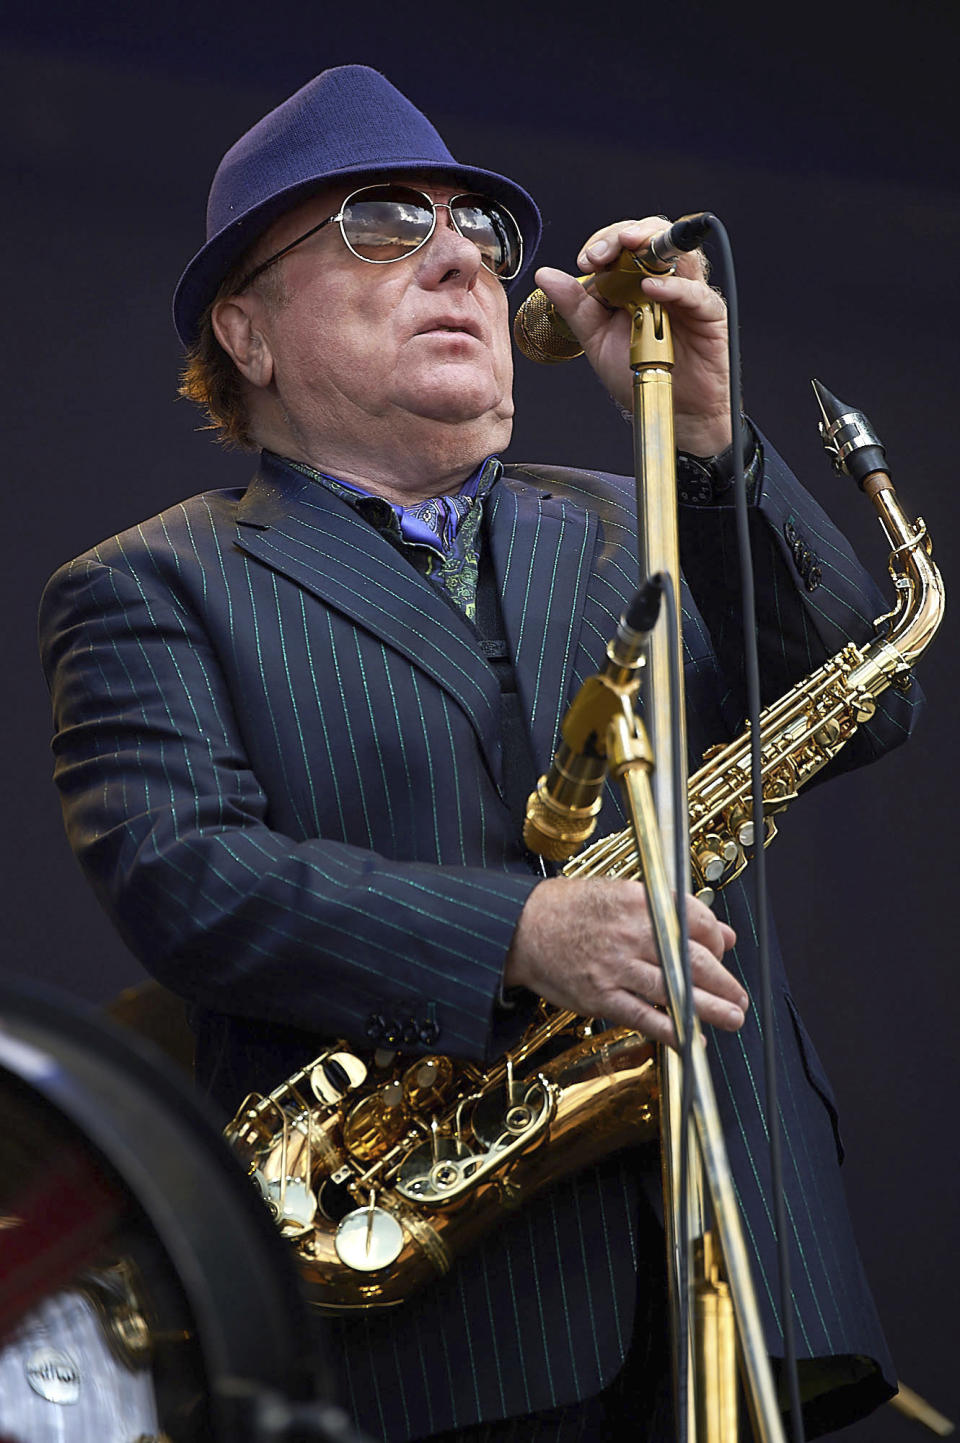 Van Morrison performing in concert at the 2018 British Summer Time Music Festival in Hyde Park. (zz/KGC-247/STAR MAX/IPx)